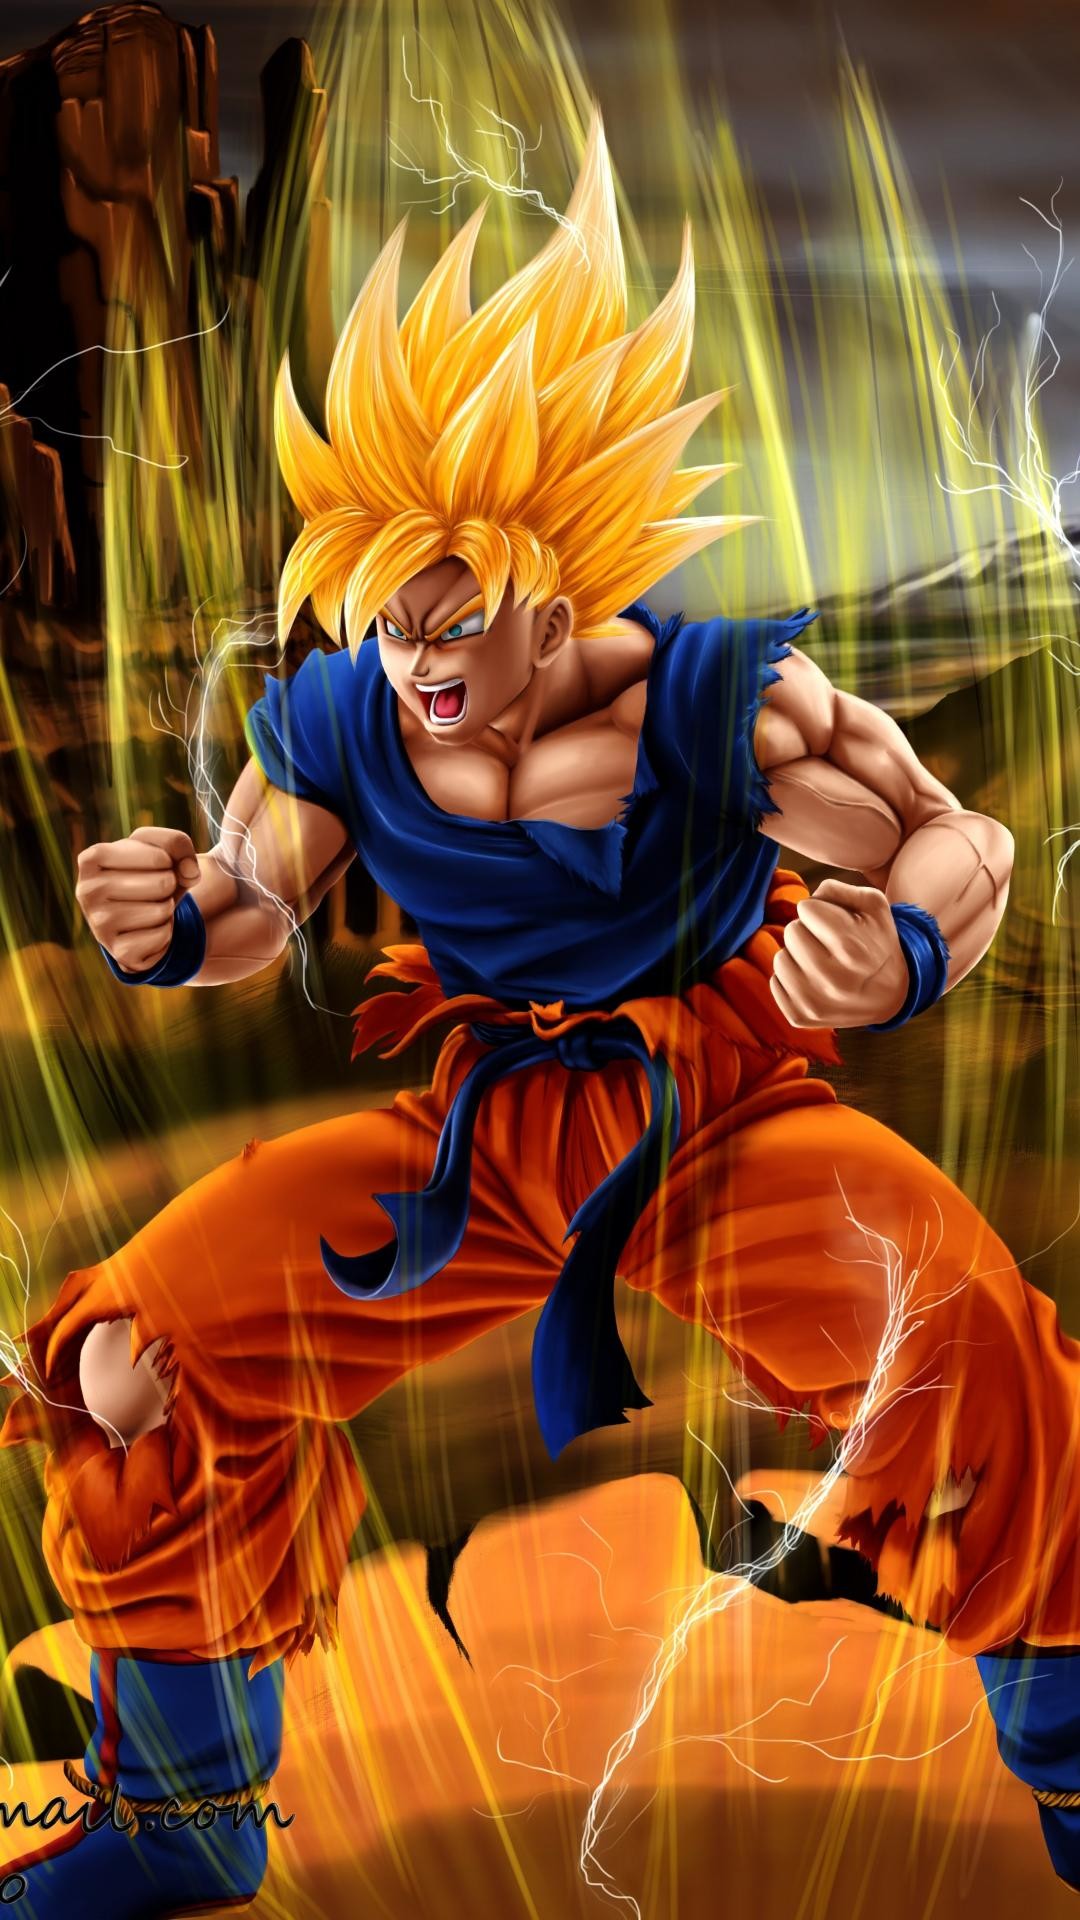 Dragon Ball Z Backgrounds, Cool Backgrounds, Images - Dragon Ball Z Hd  Wallpaper For Mobile - 1080x1920 Wallpaper 